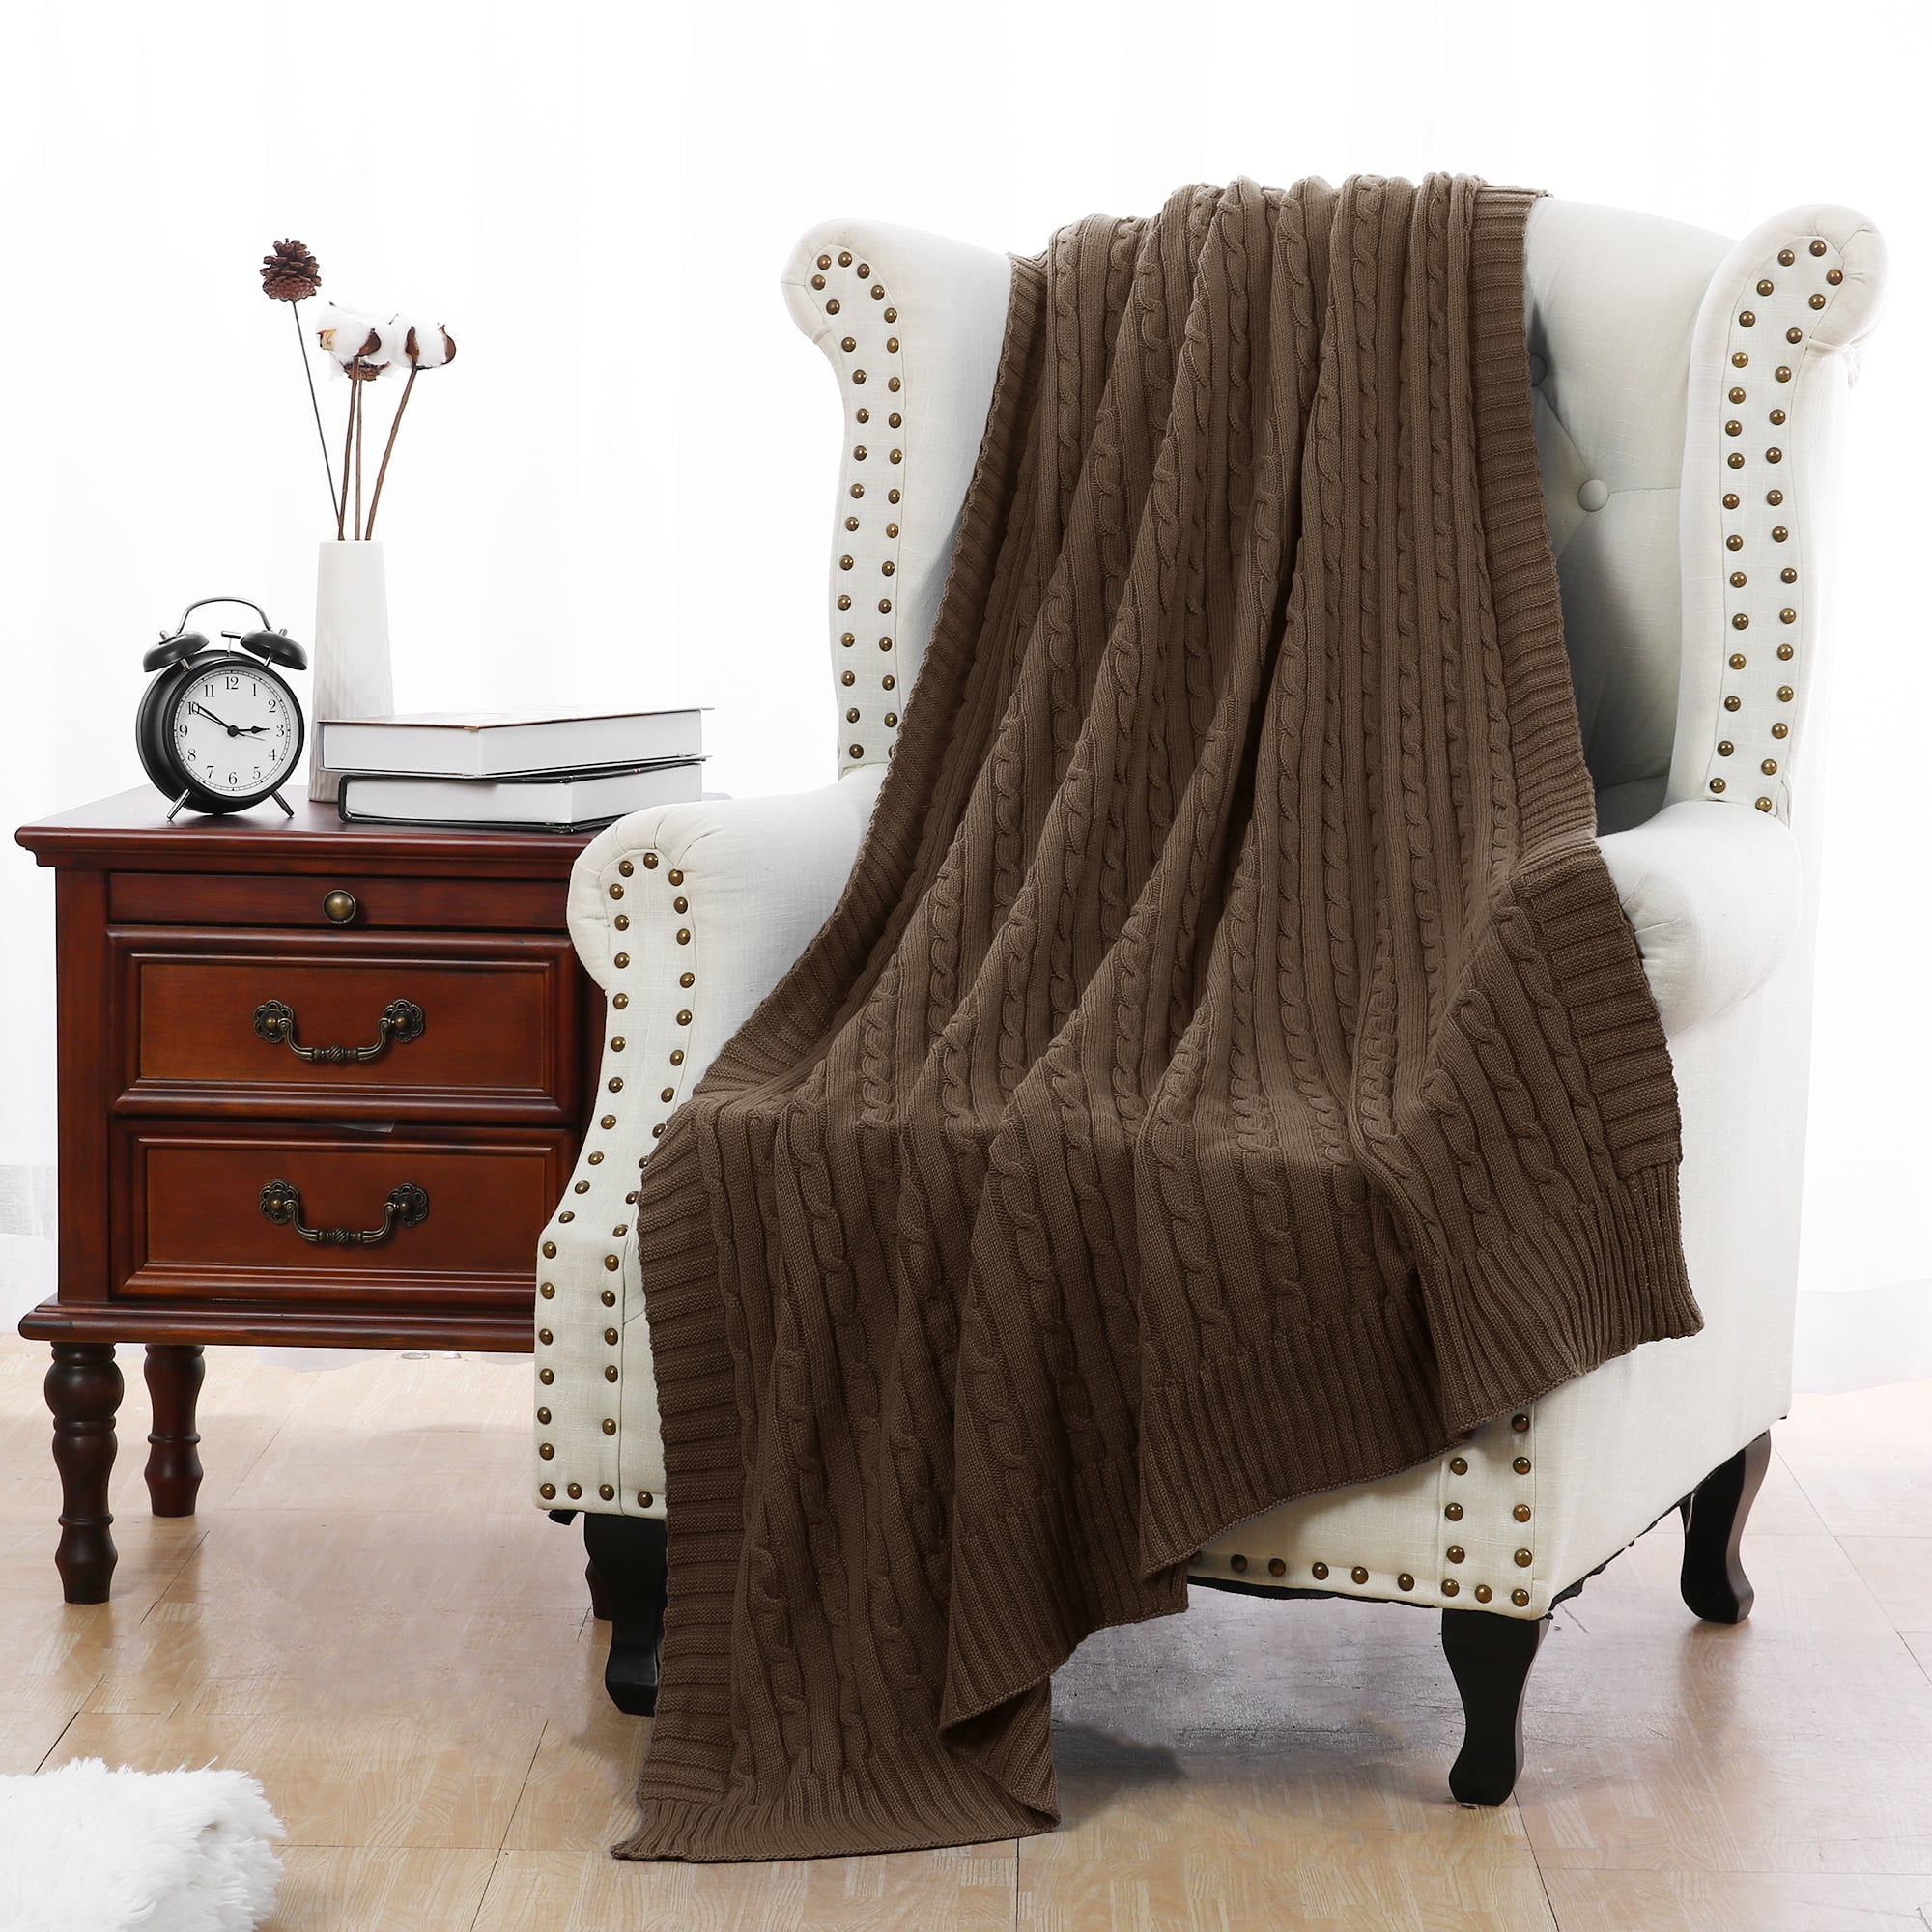 Cotton Knitted Throw Blanket Soft Warm Cable Knit Blanket